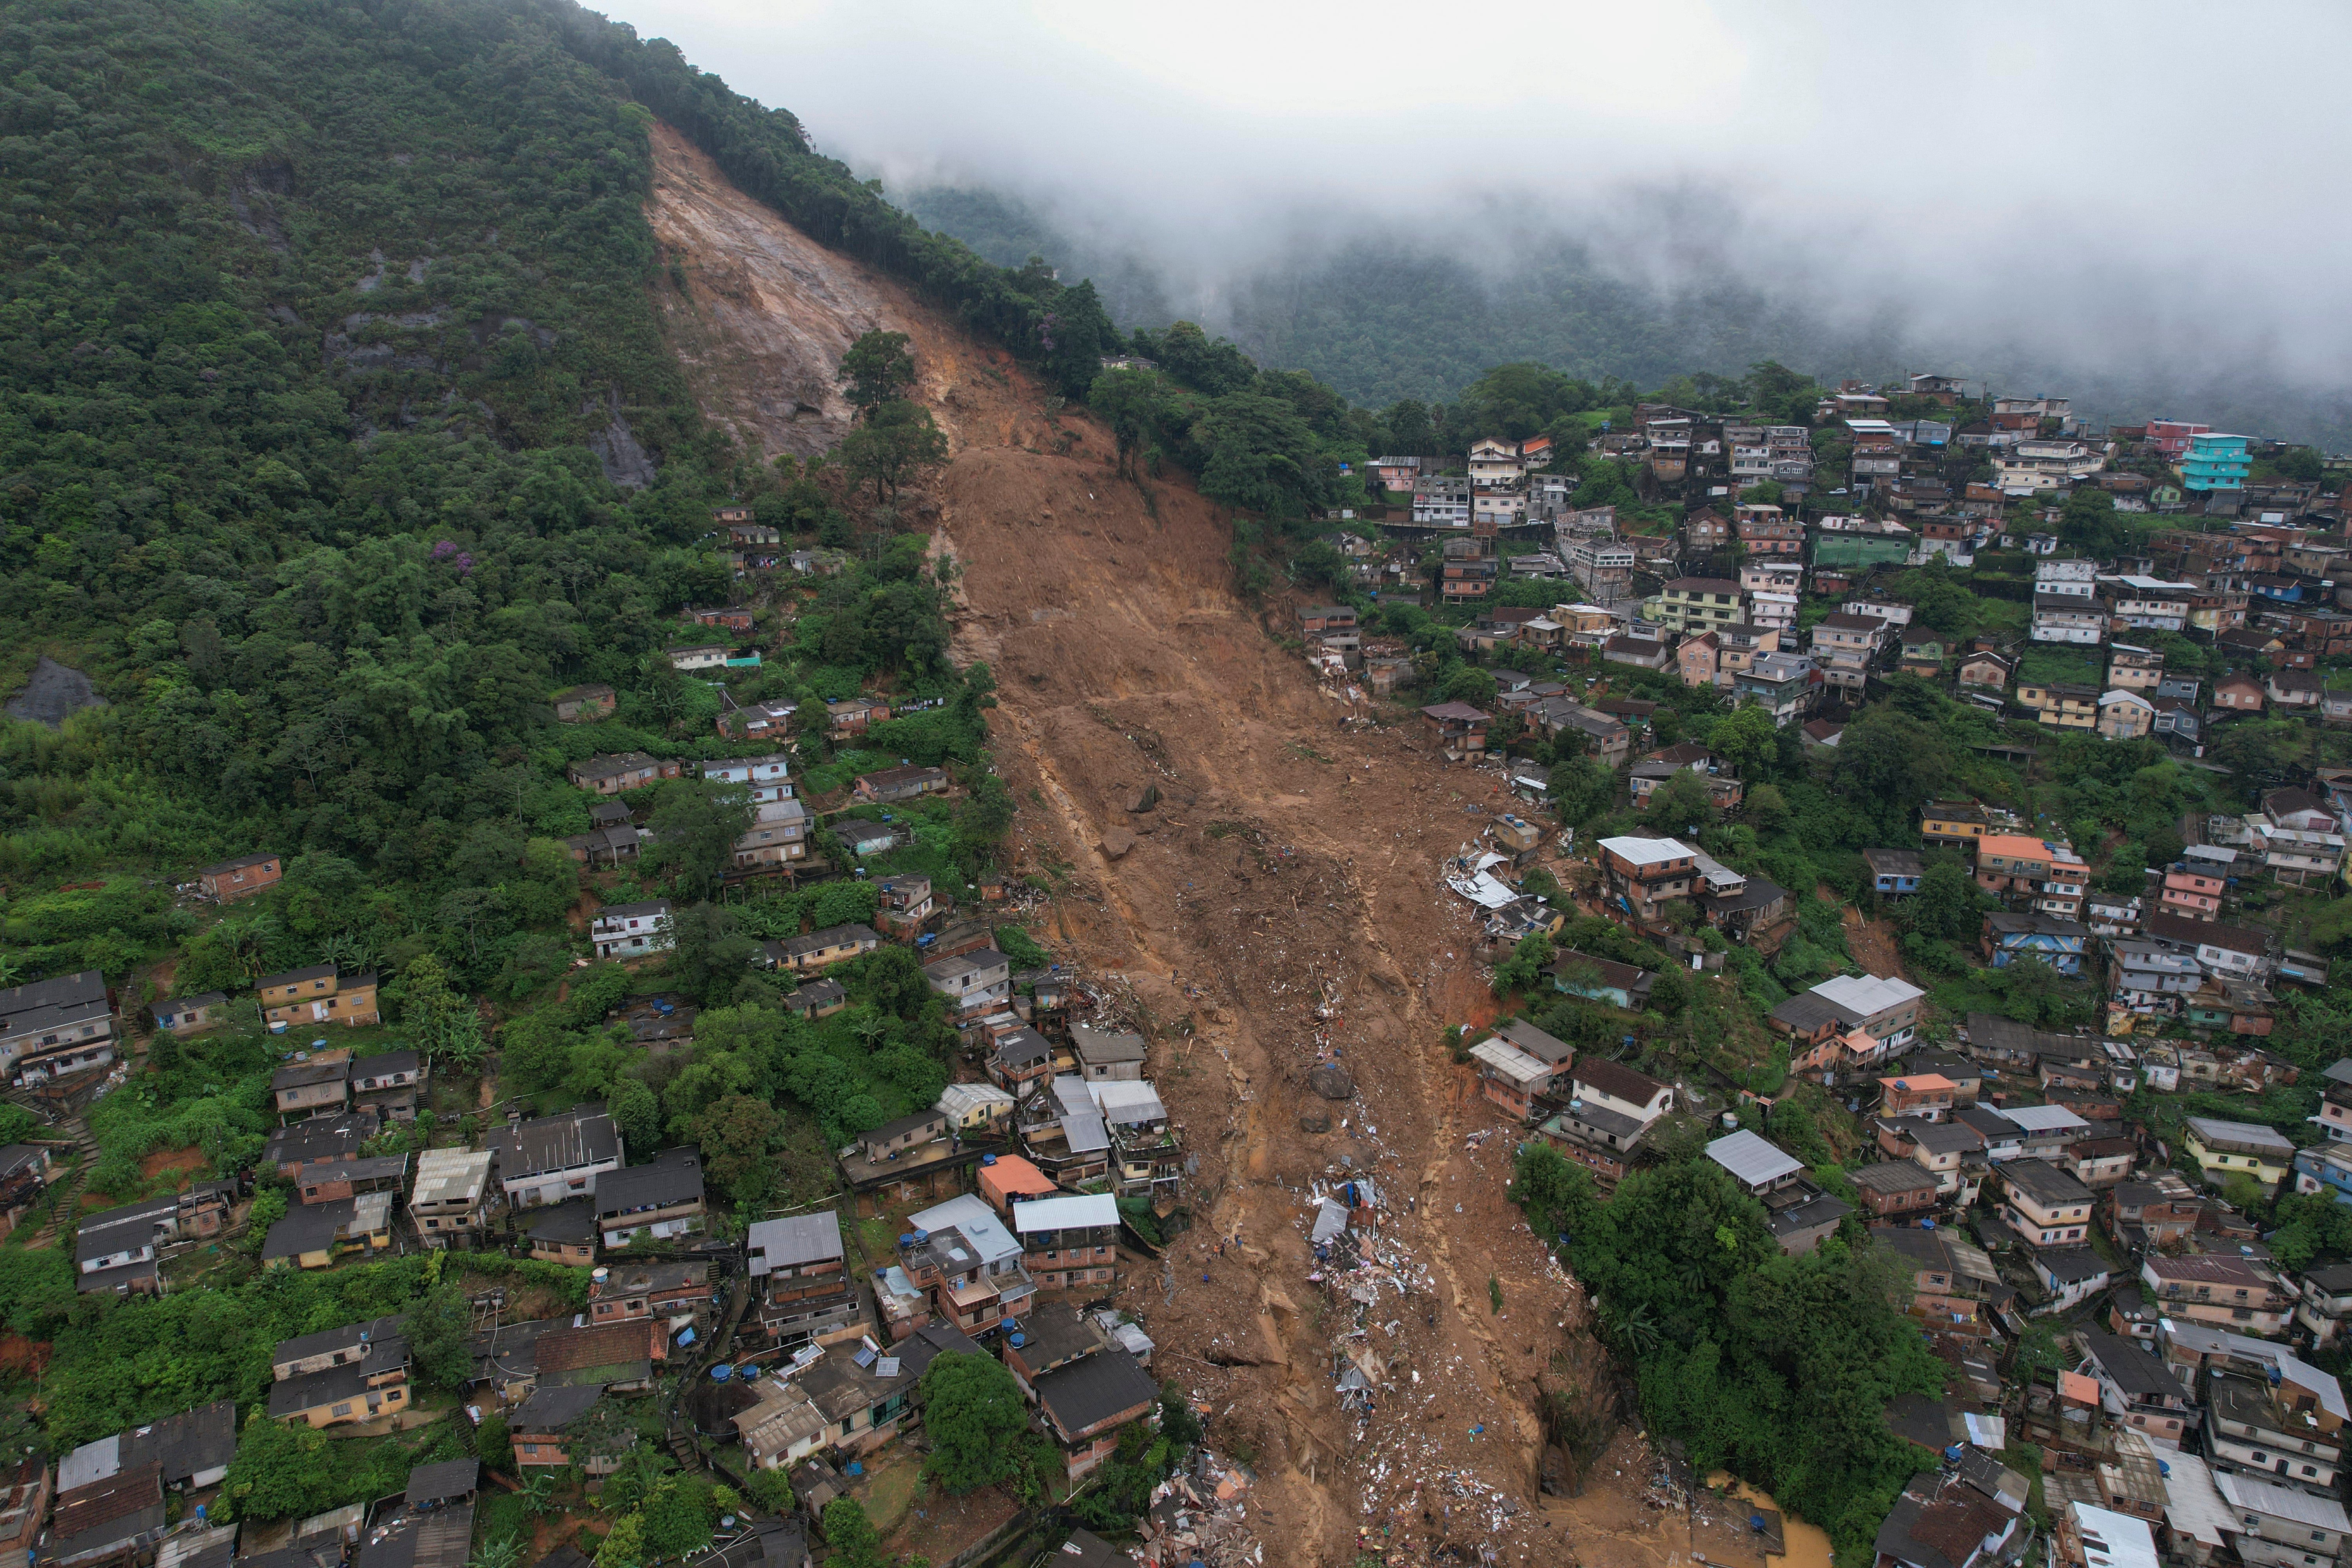 Heavy rains set off mudslides and floods in a mountainous region of Rio de Janeiro state, killing multiple people